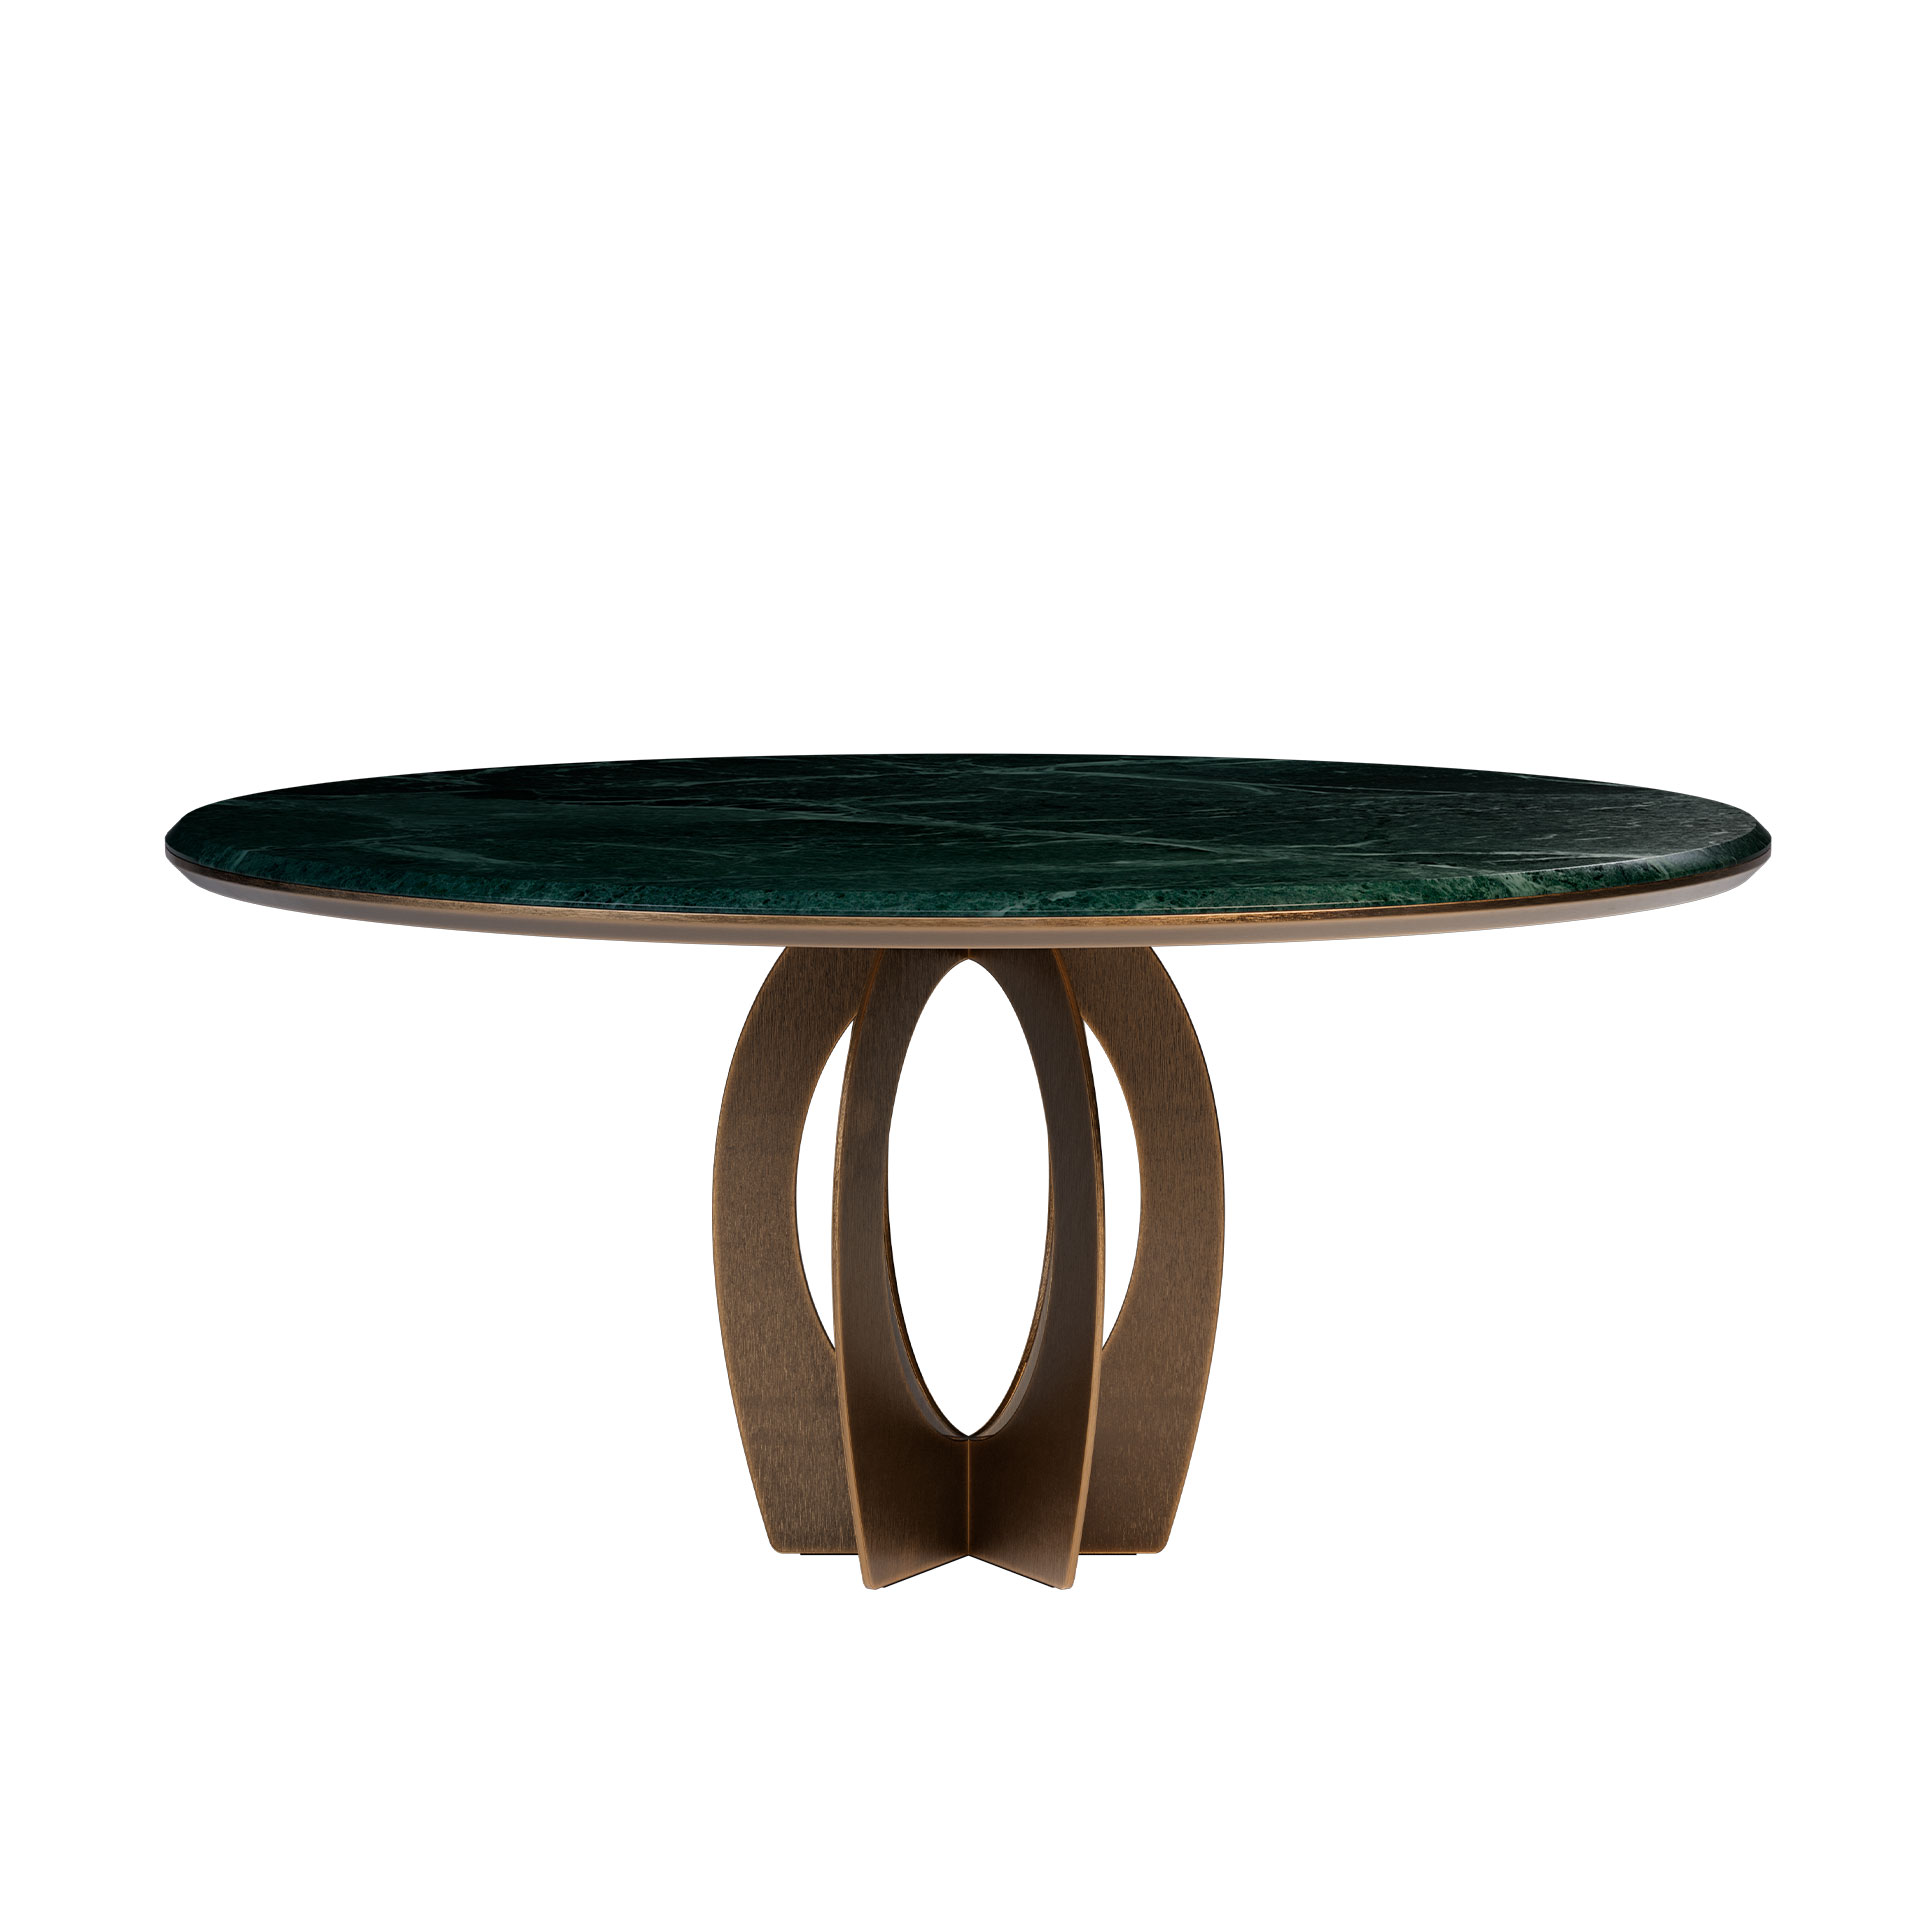 Boulder round dining table